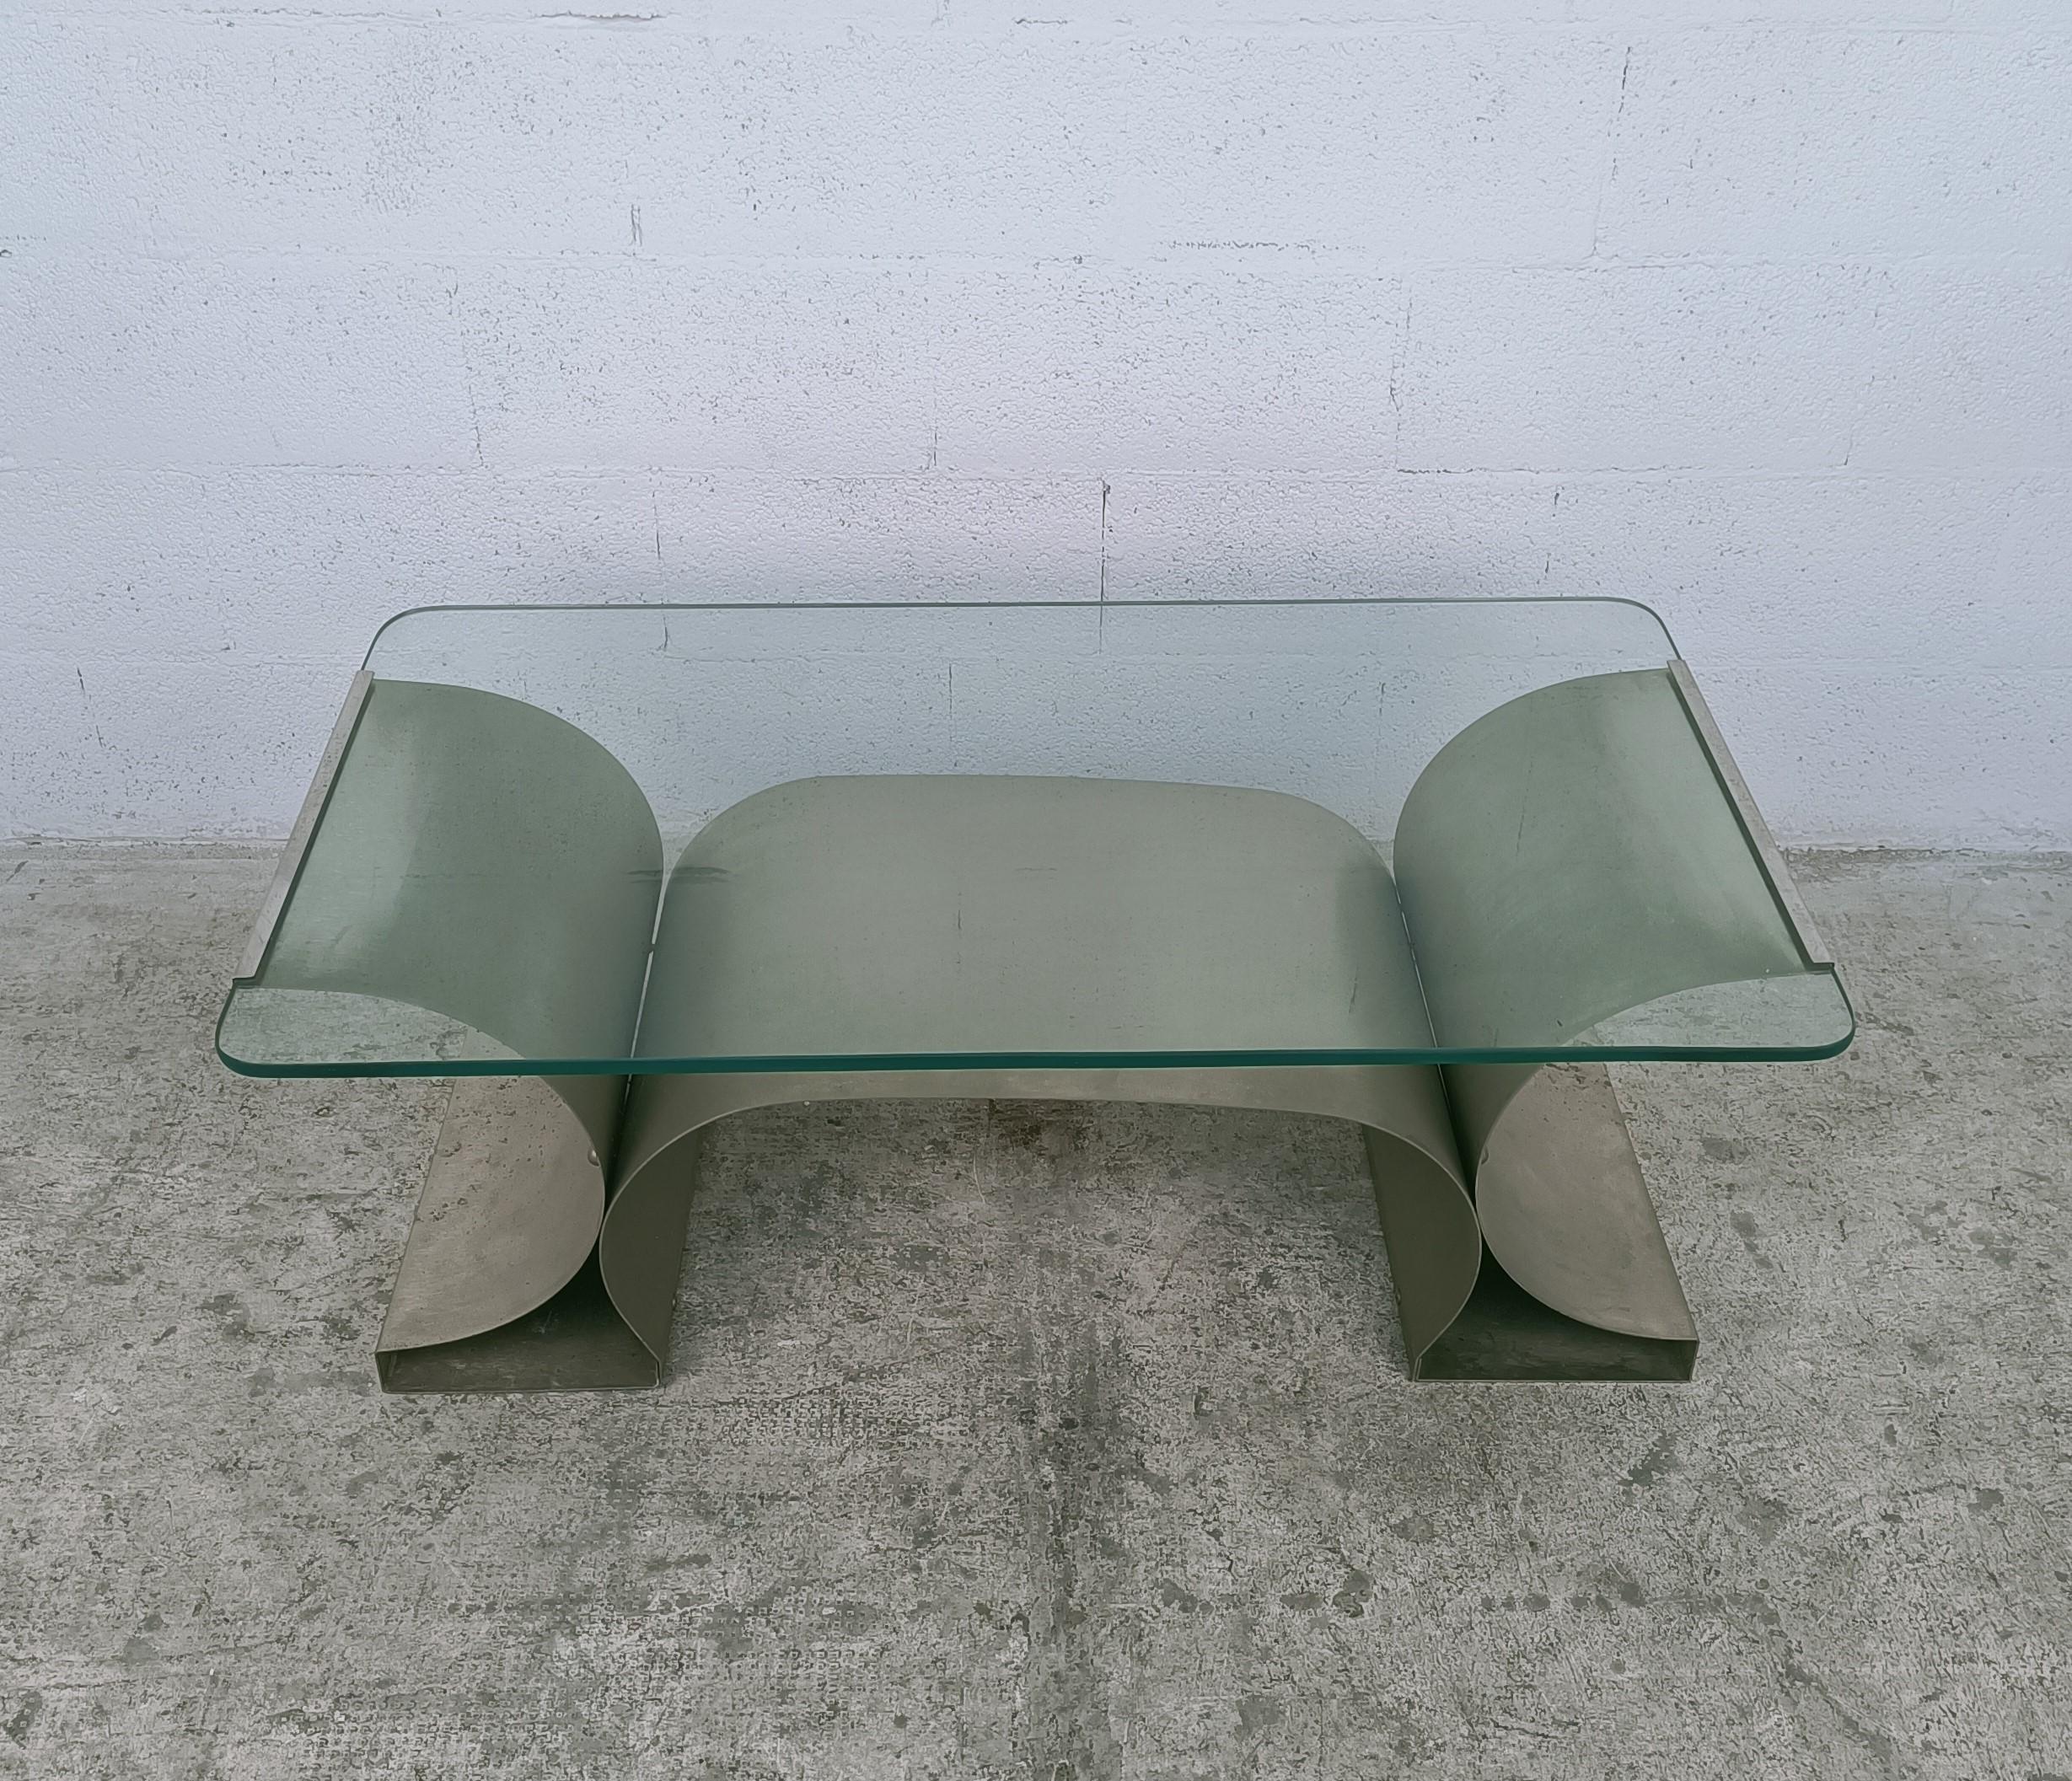 Mid-Century Modern Stainless Steel and Glass Coffee Table by Francois Monnet for Kappa 70s